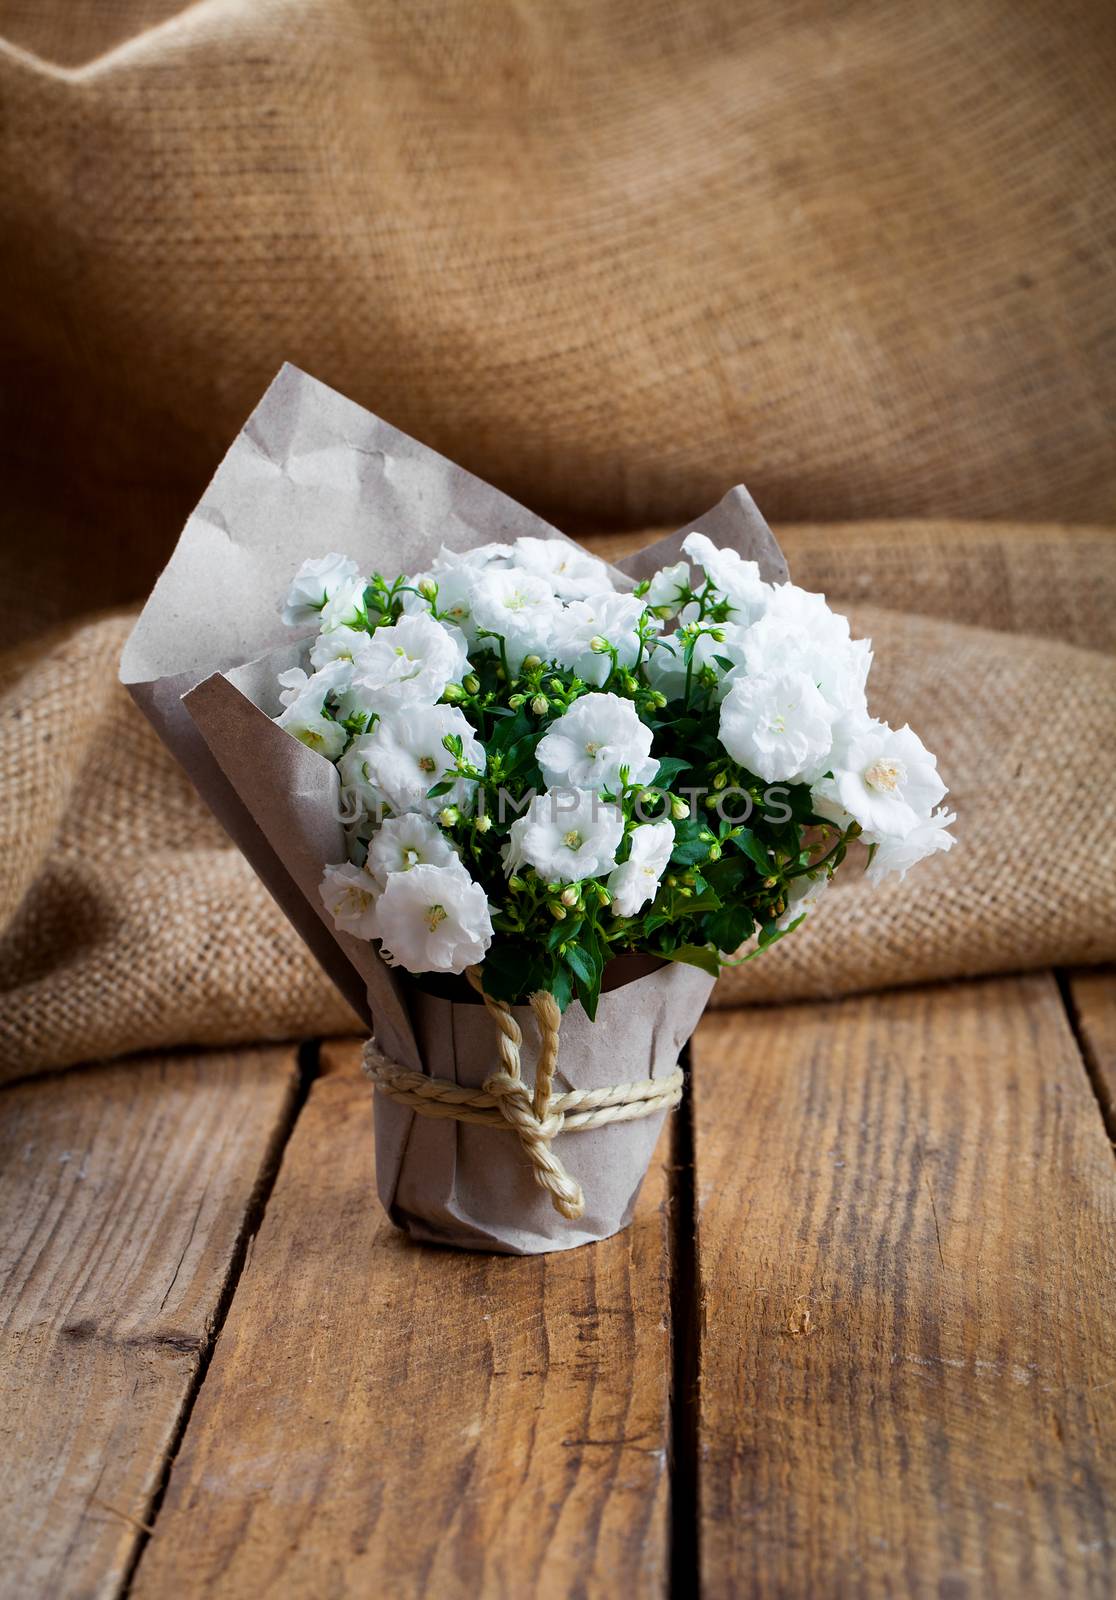 white Campanula terry flowers in paper packaging, on sackcloth, wooden background